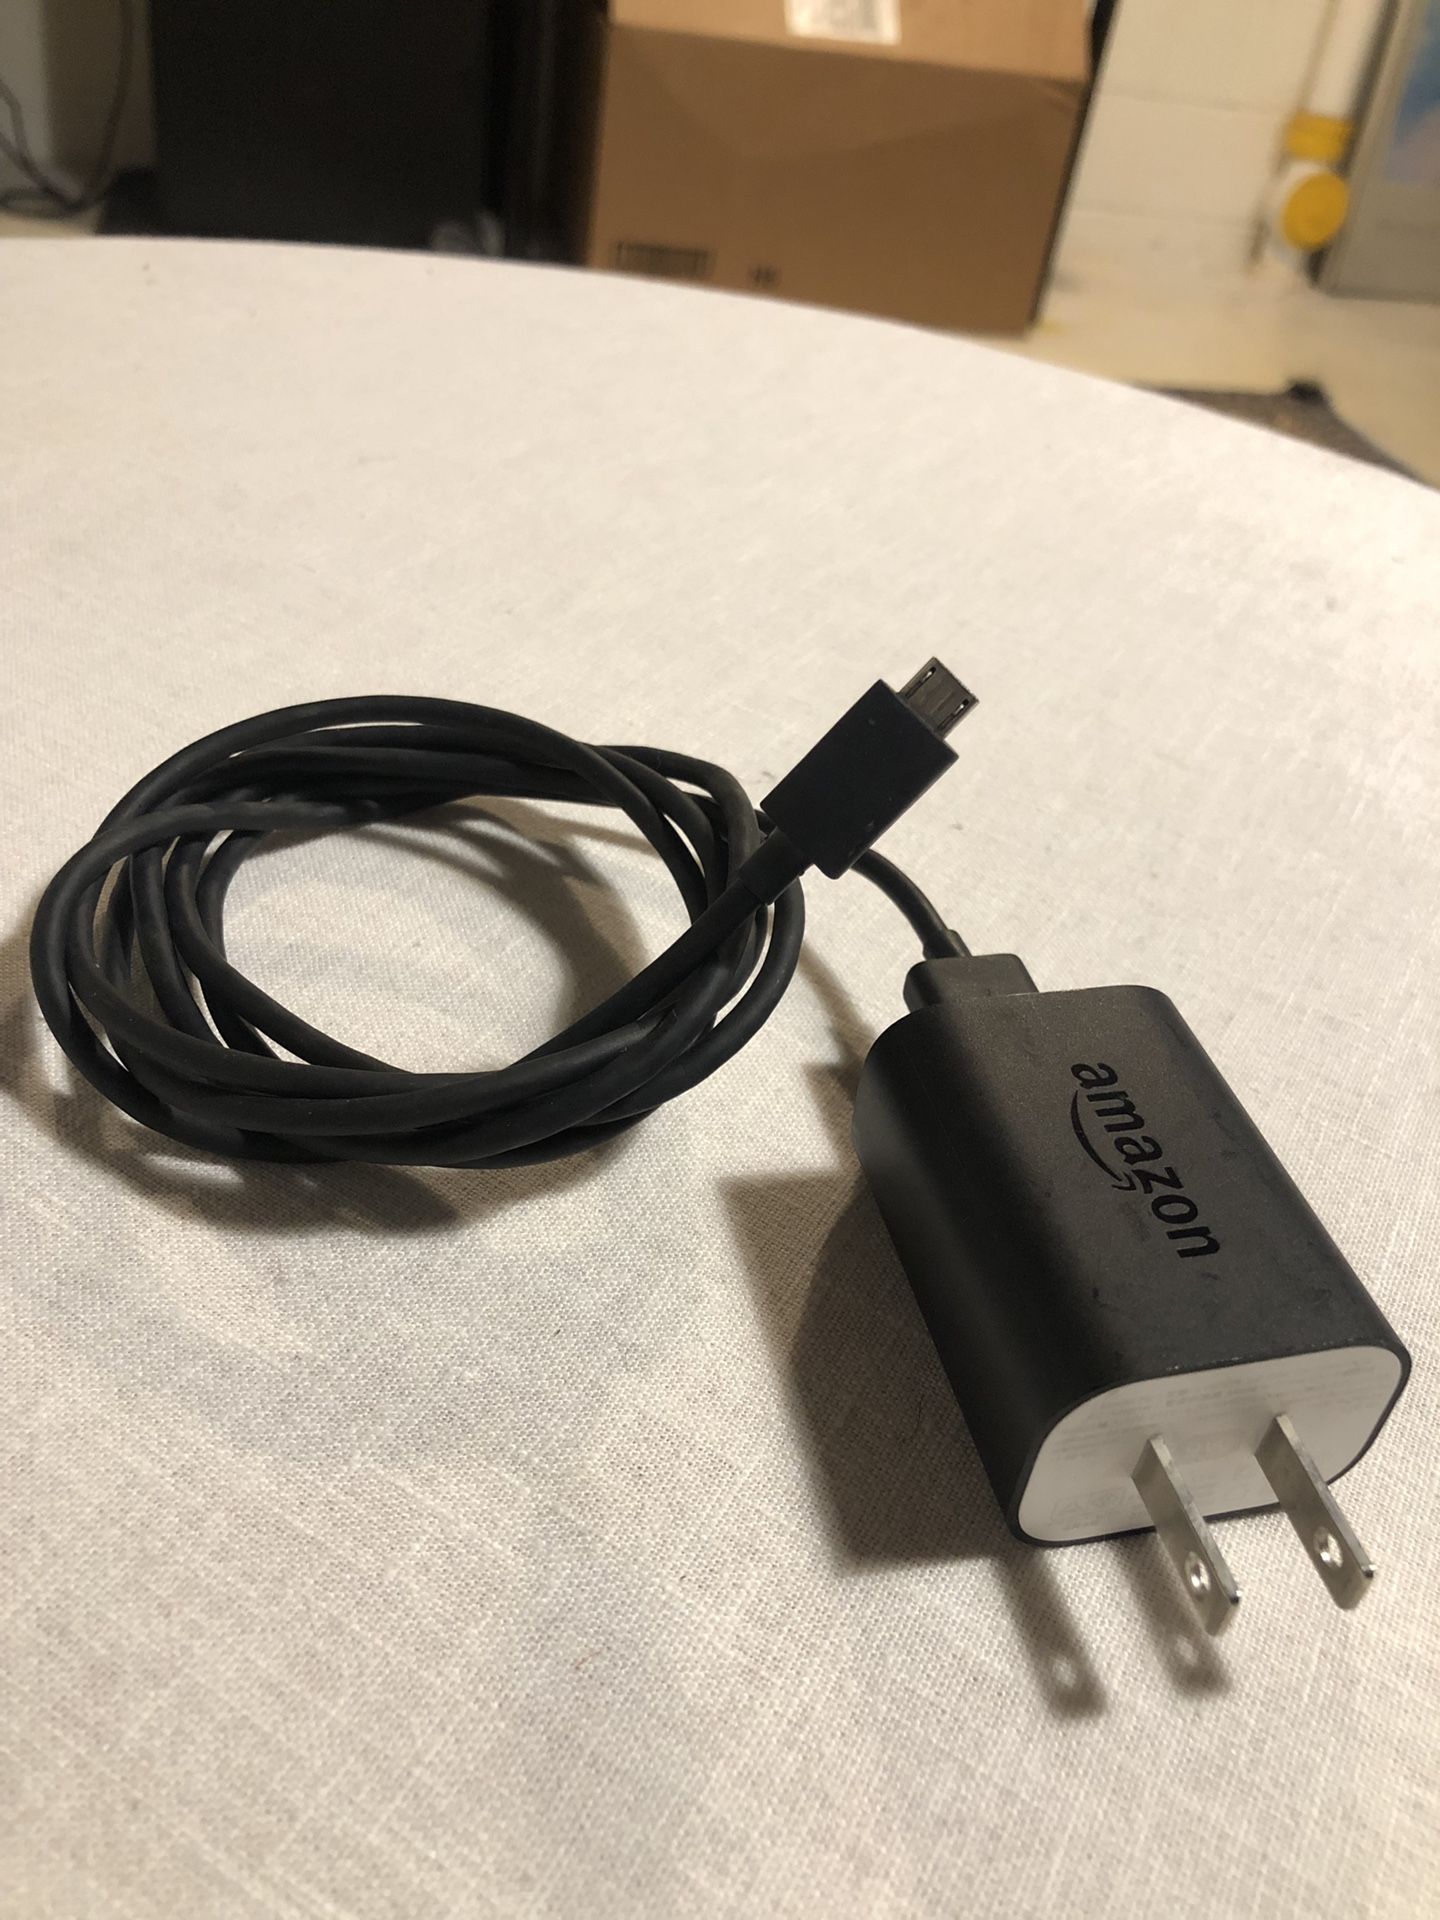 Amazon USB official Charger and power adapter